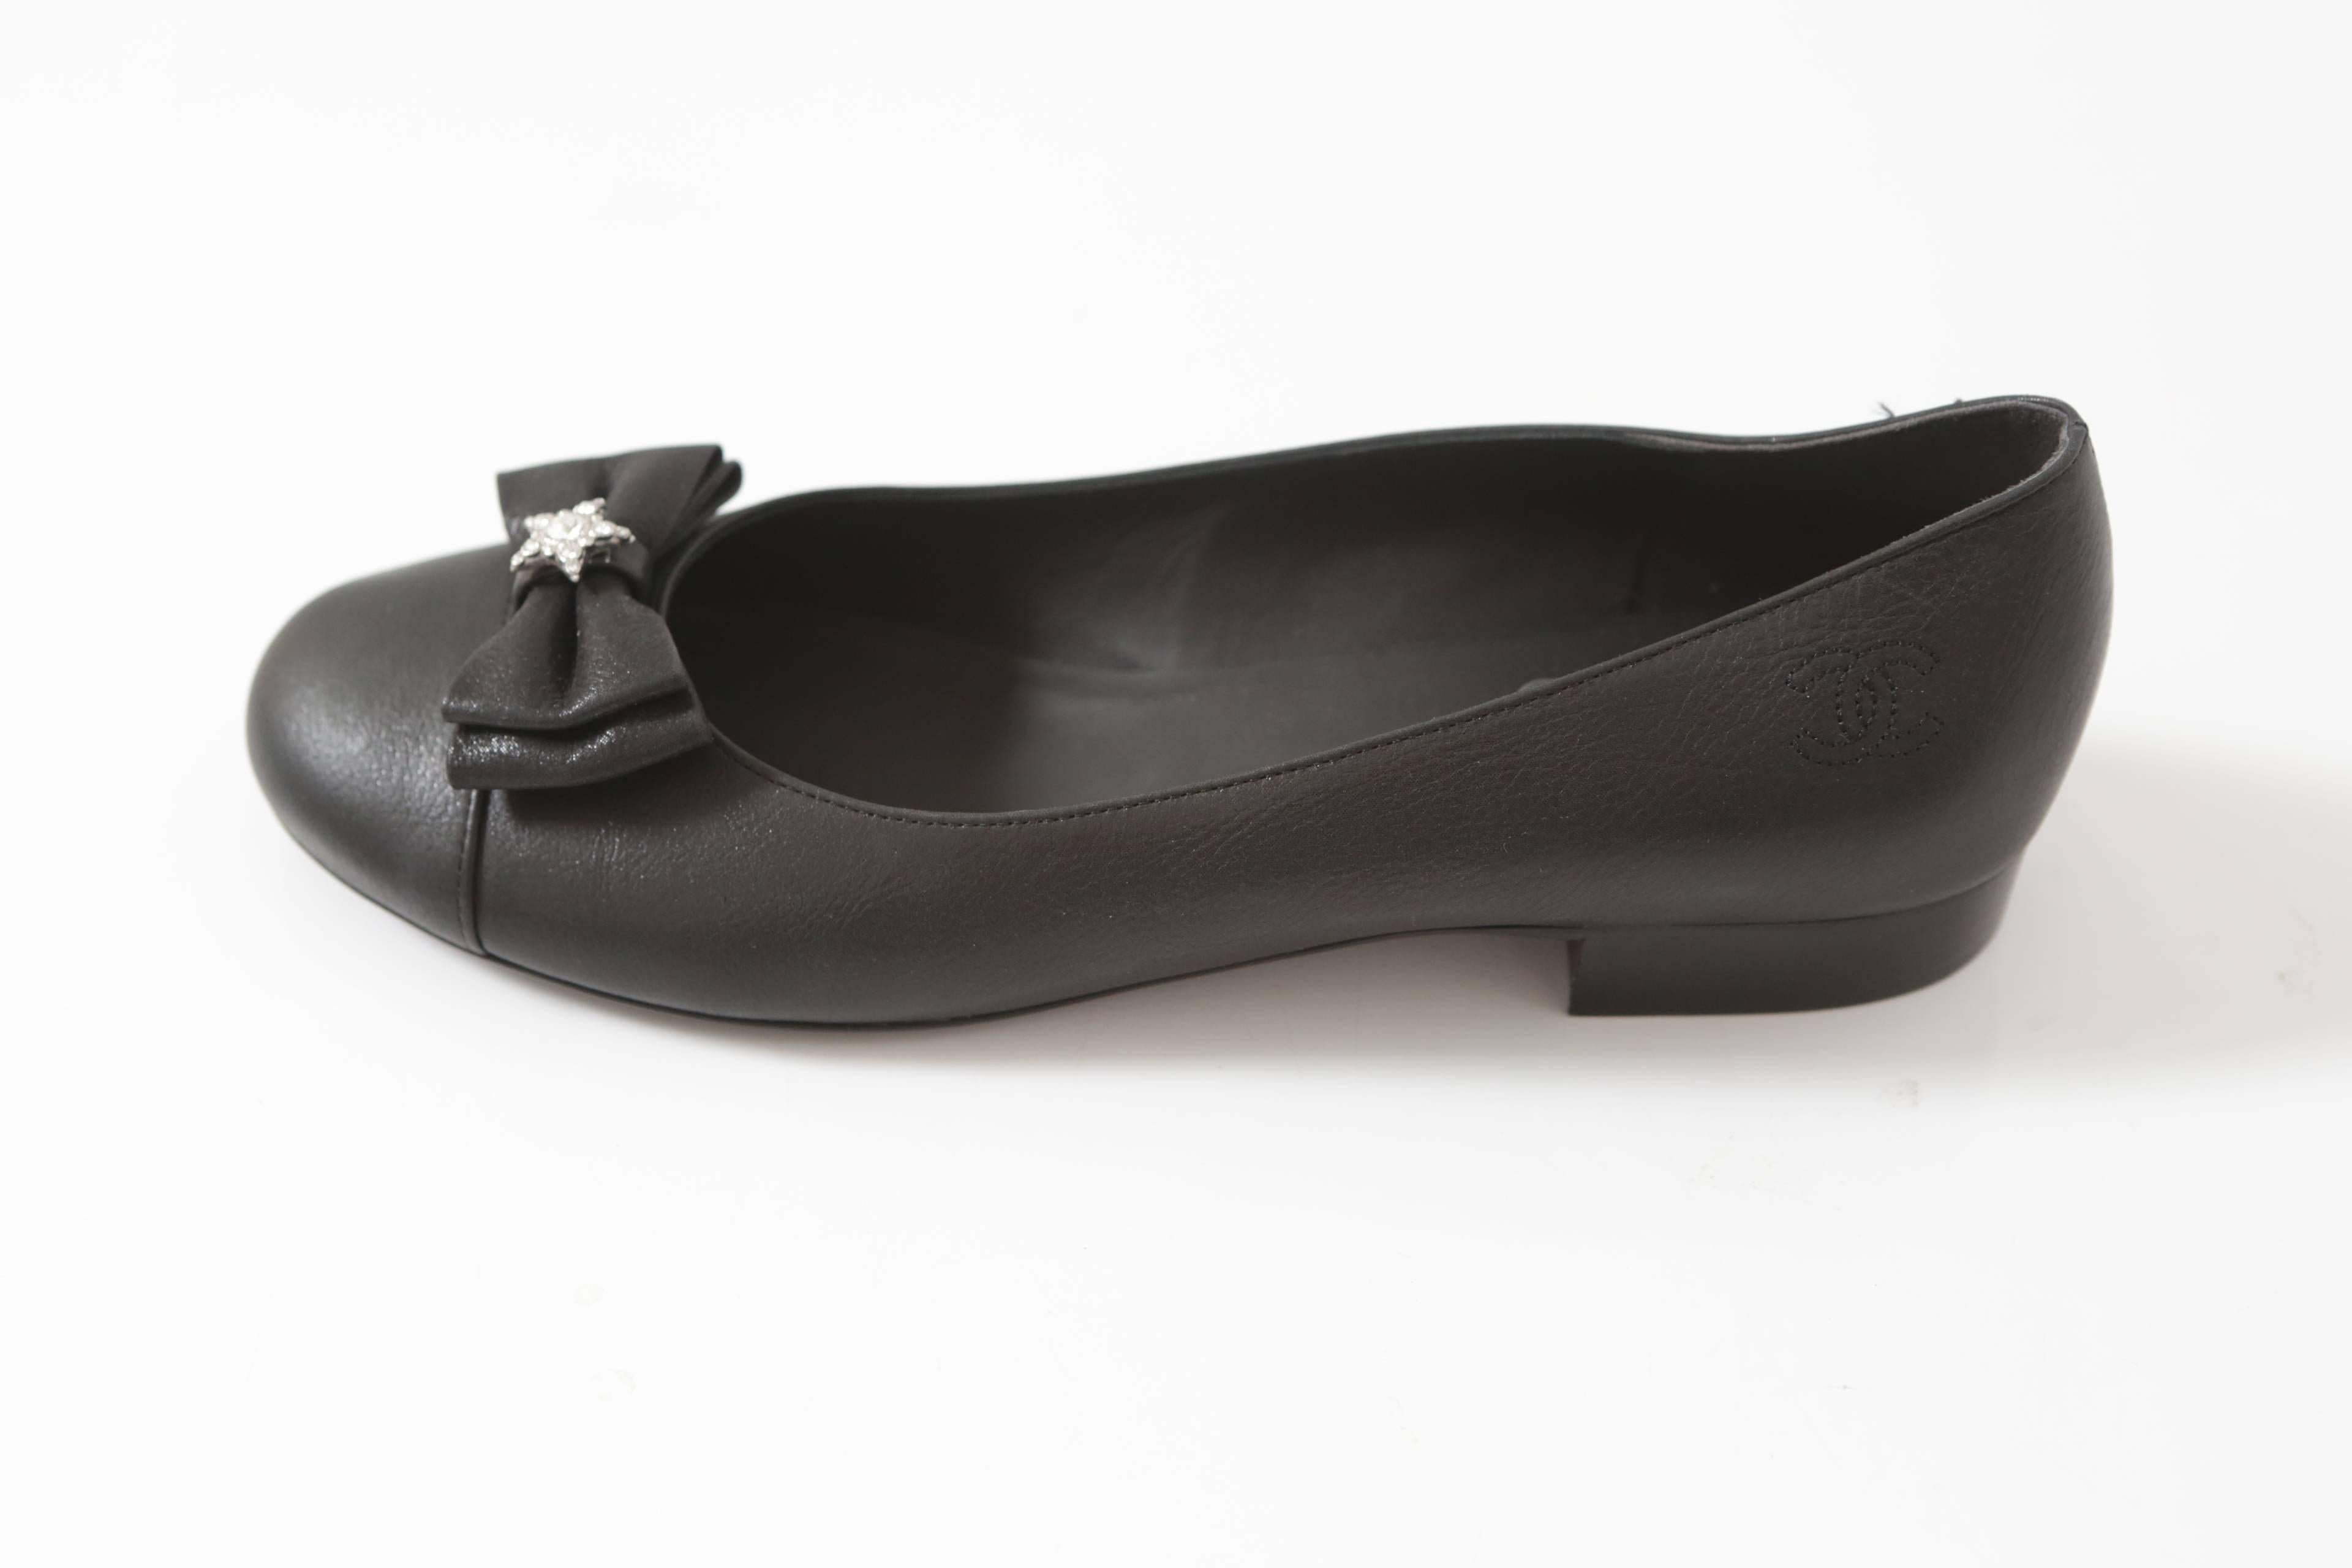 Women's Chanel Black Leather Ballerina Flats with Grosgrain Bow & Crystal 